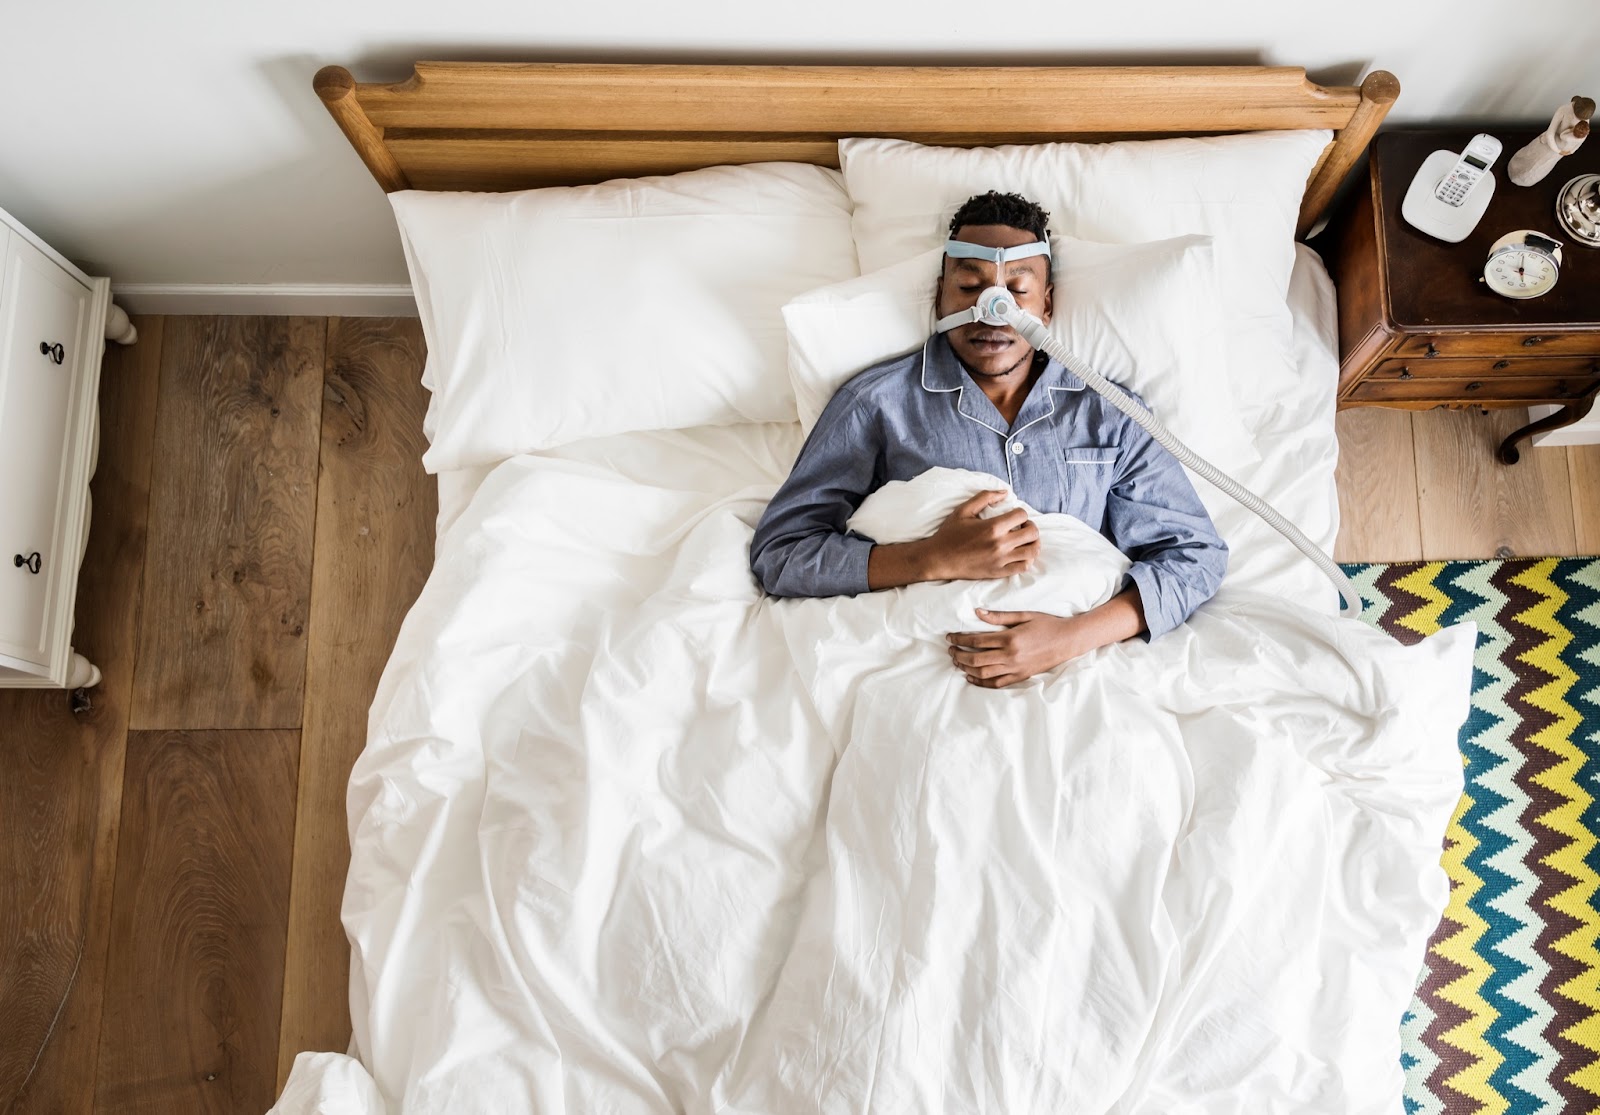 Aerial view of a man sleeping in his bed with a sleep apnea mask on his face.